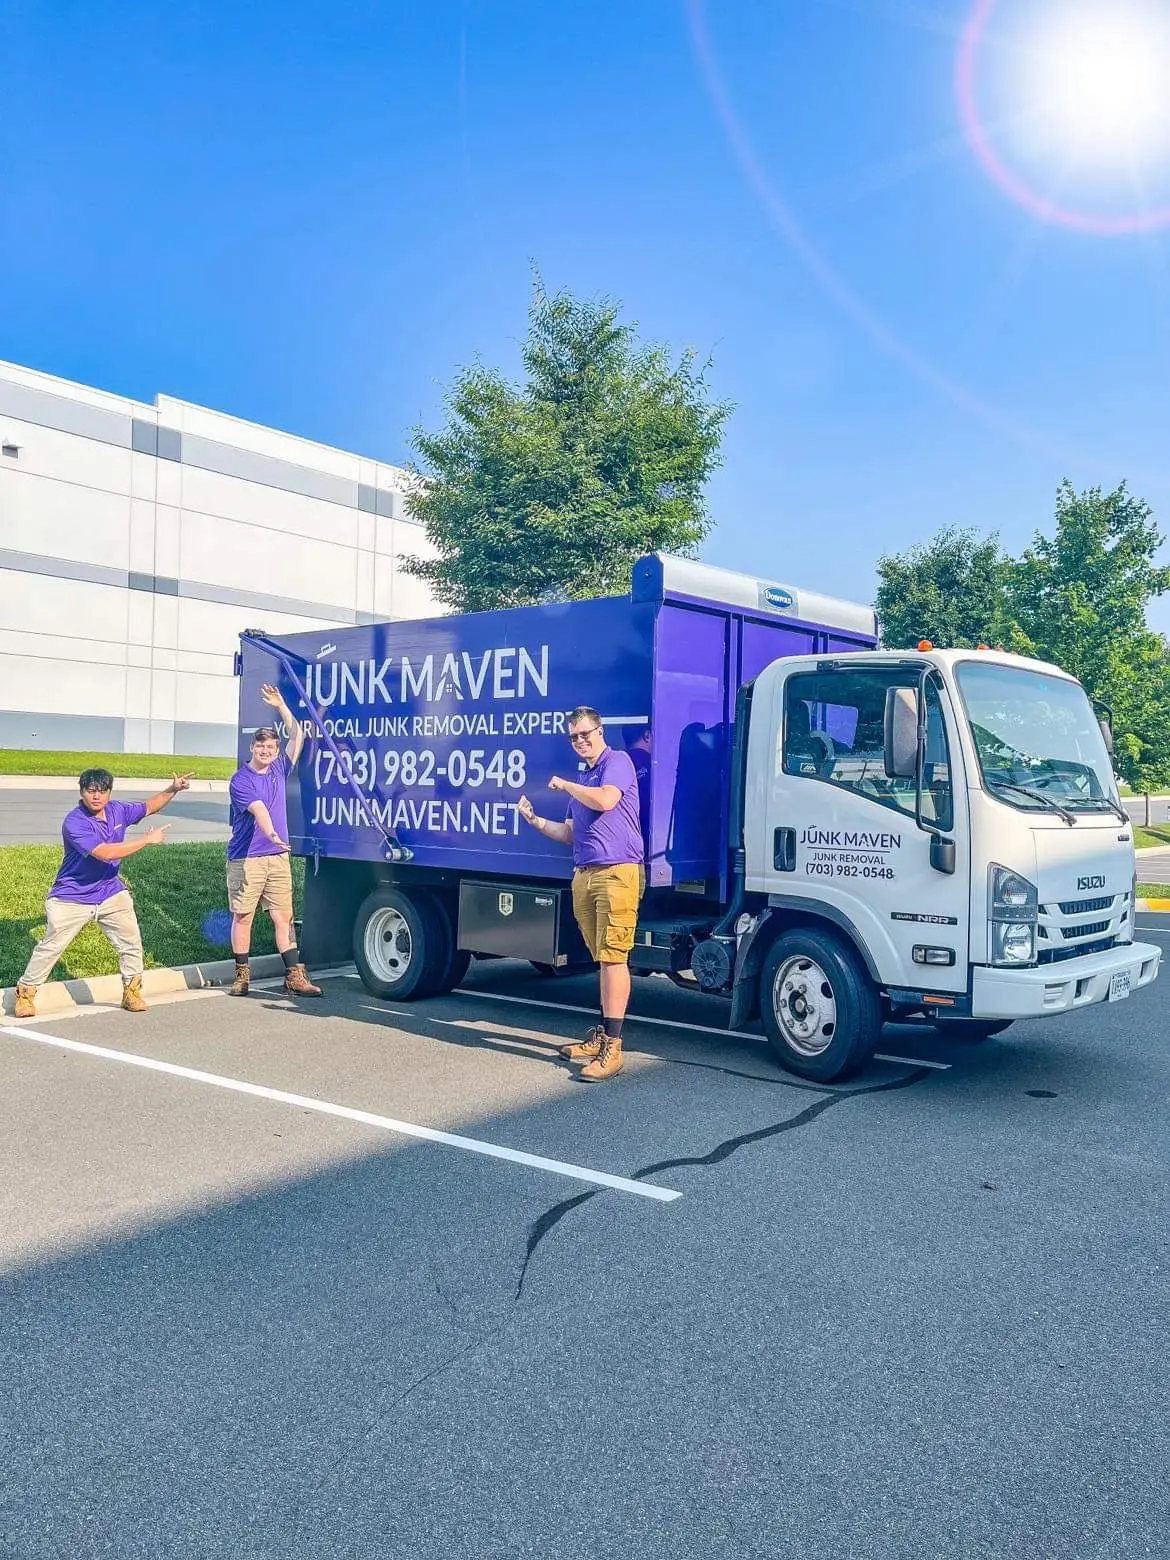 A joyful image showcasing three members of the Junk Maven team, including myself, all smiling and pointing proudly at our signature purple Junk Maven dump truck. We are dressed in professional attire, embodying the spirit of clutter conquerors dedicated to creating cleaner, brighter spaces in Northern Virginia. The truck in the background symbolizes our commitment to efficient and effective junk removal services.